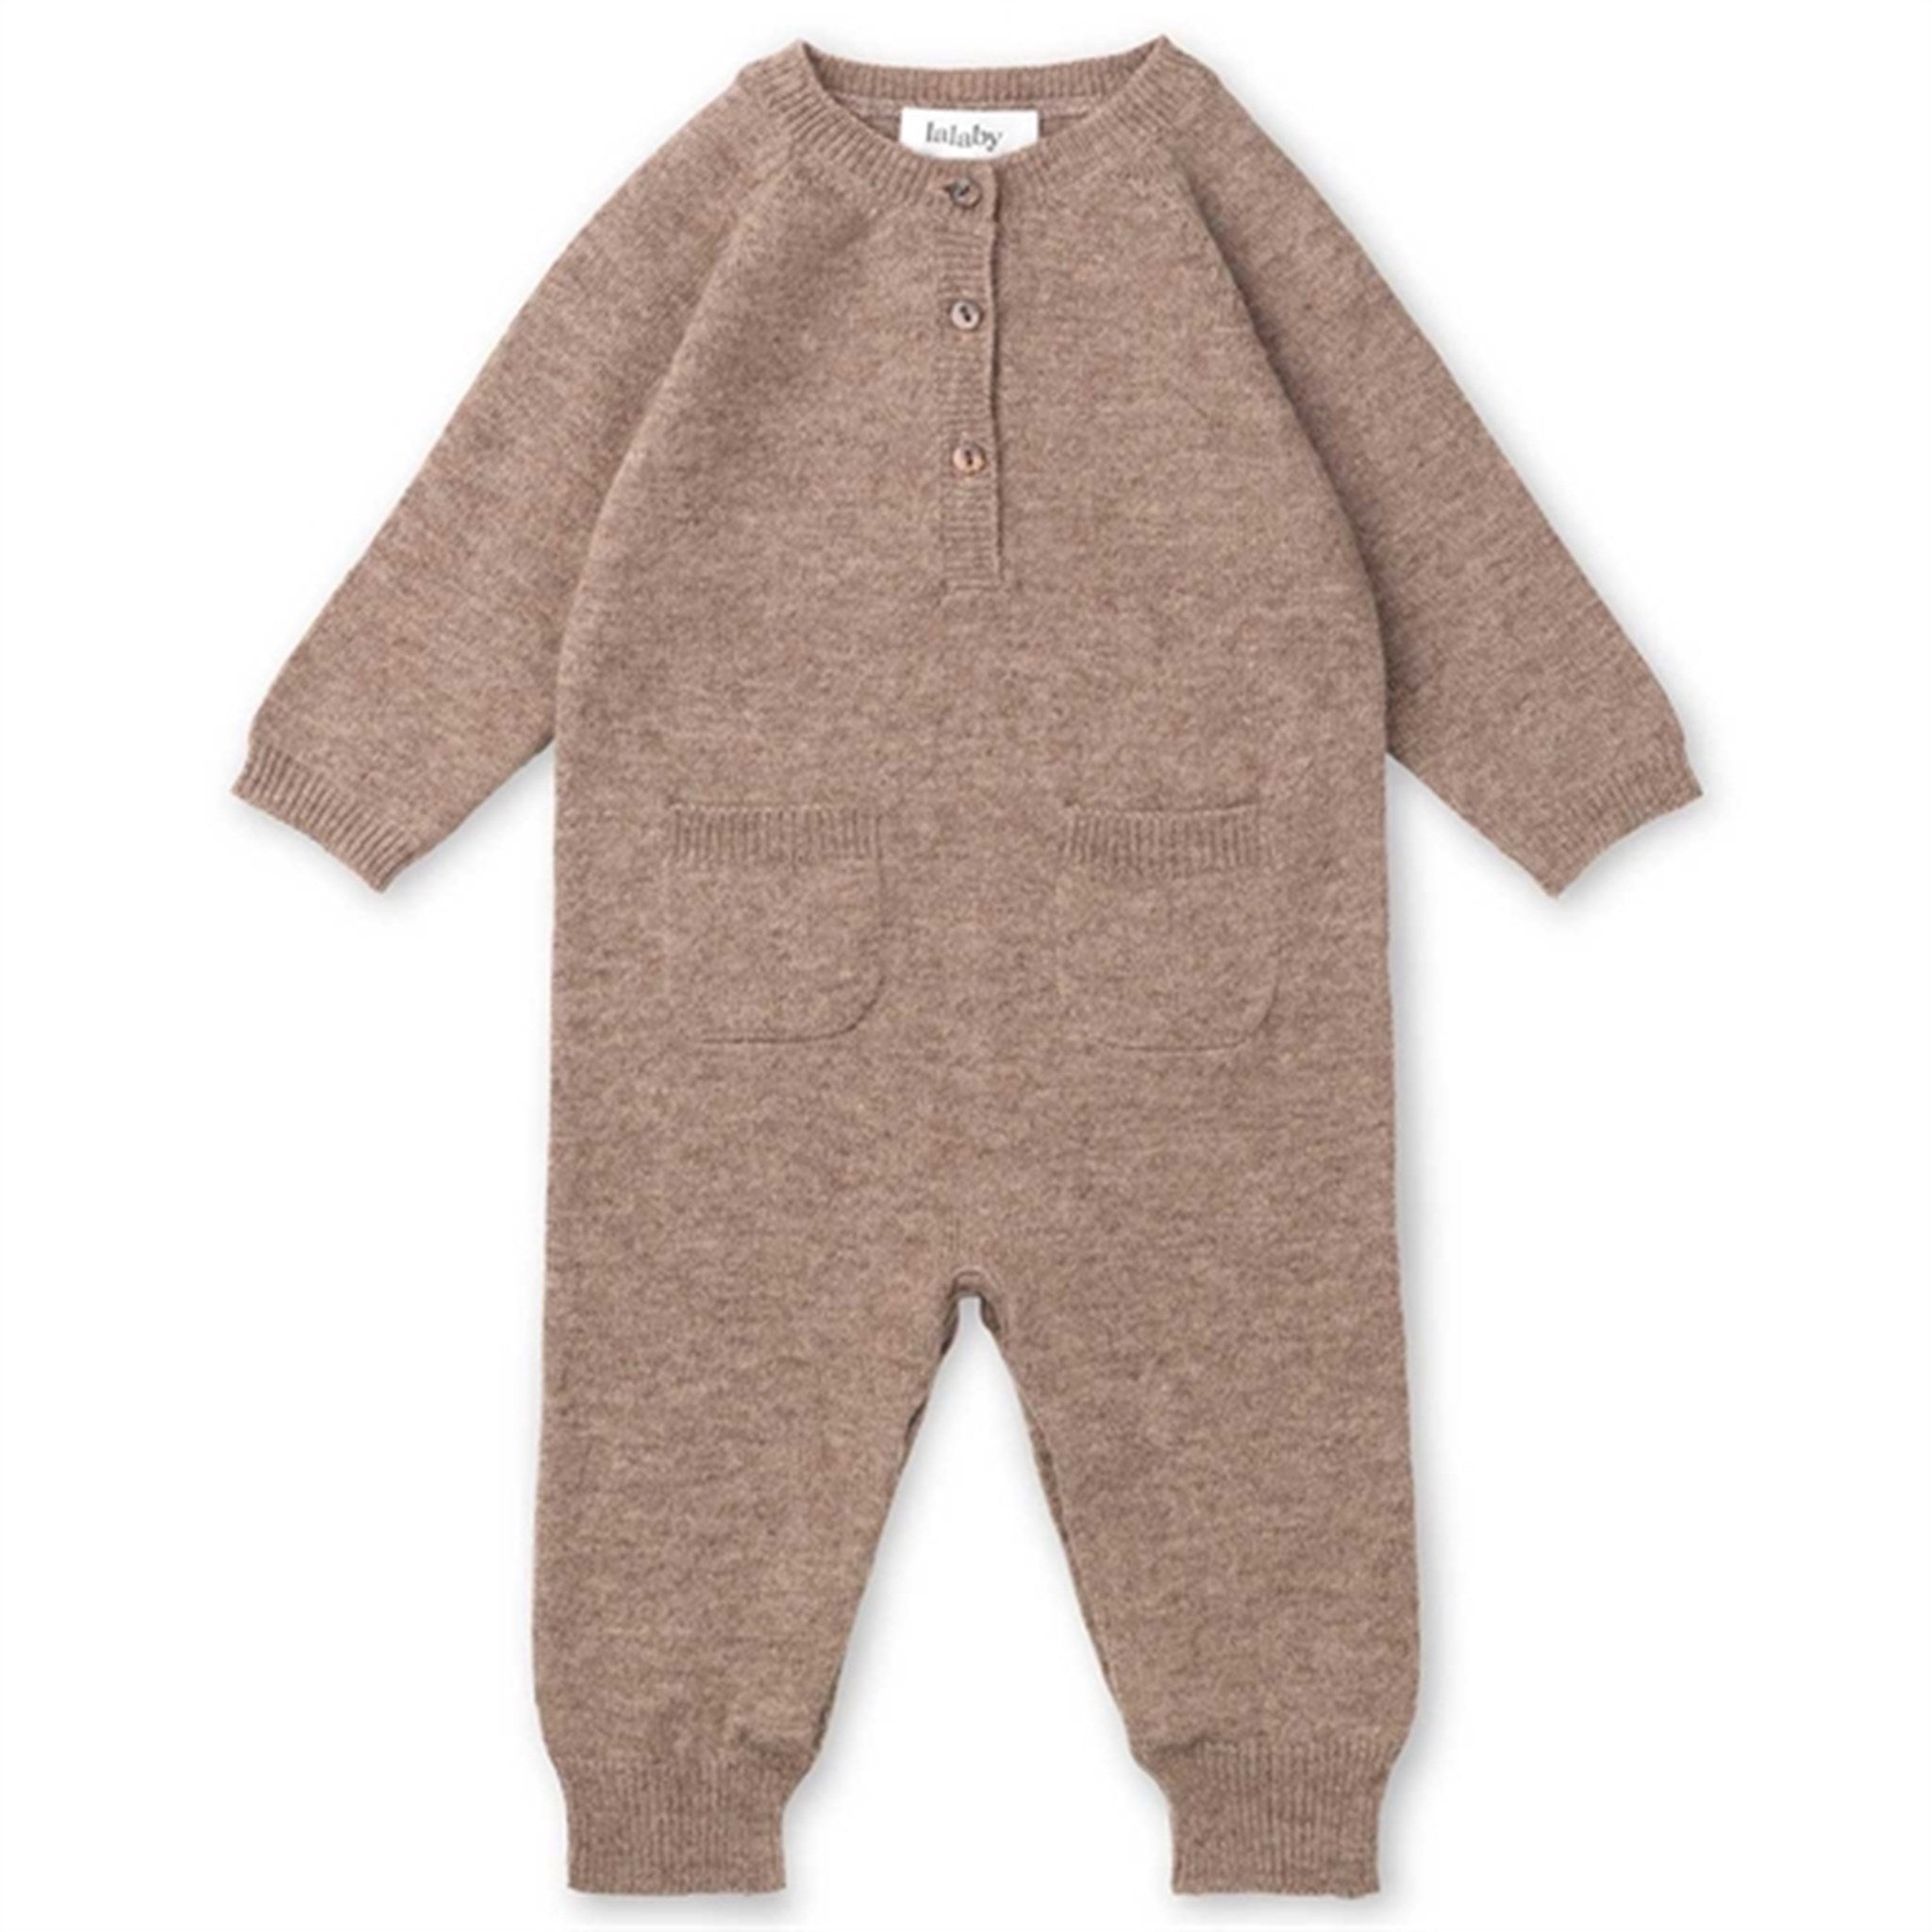 lalaby Toast Cashmere Juno Jumpsuit